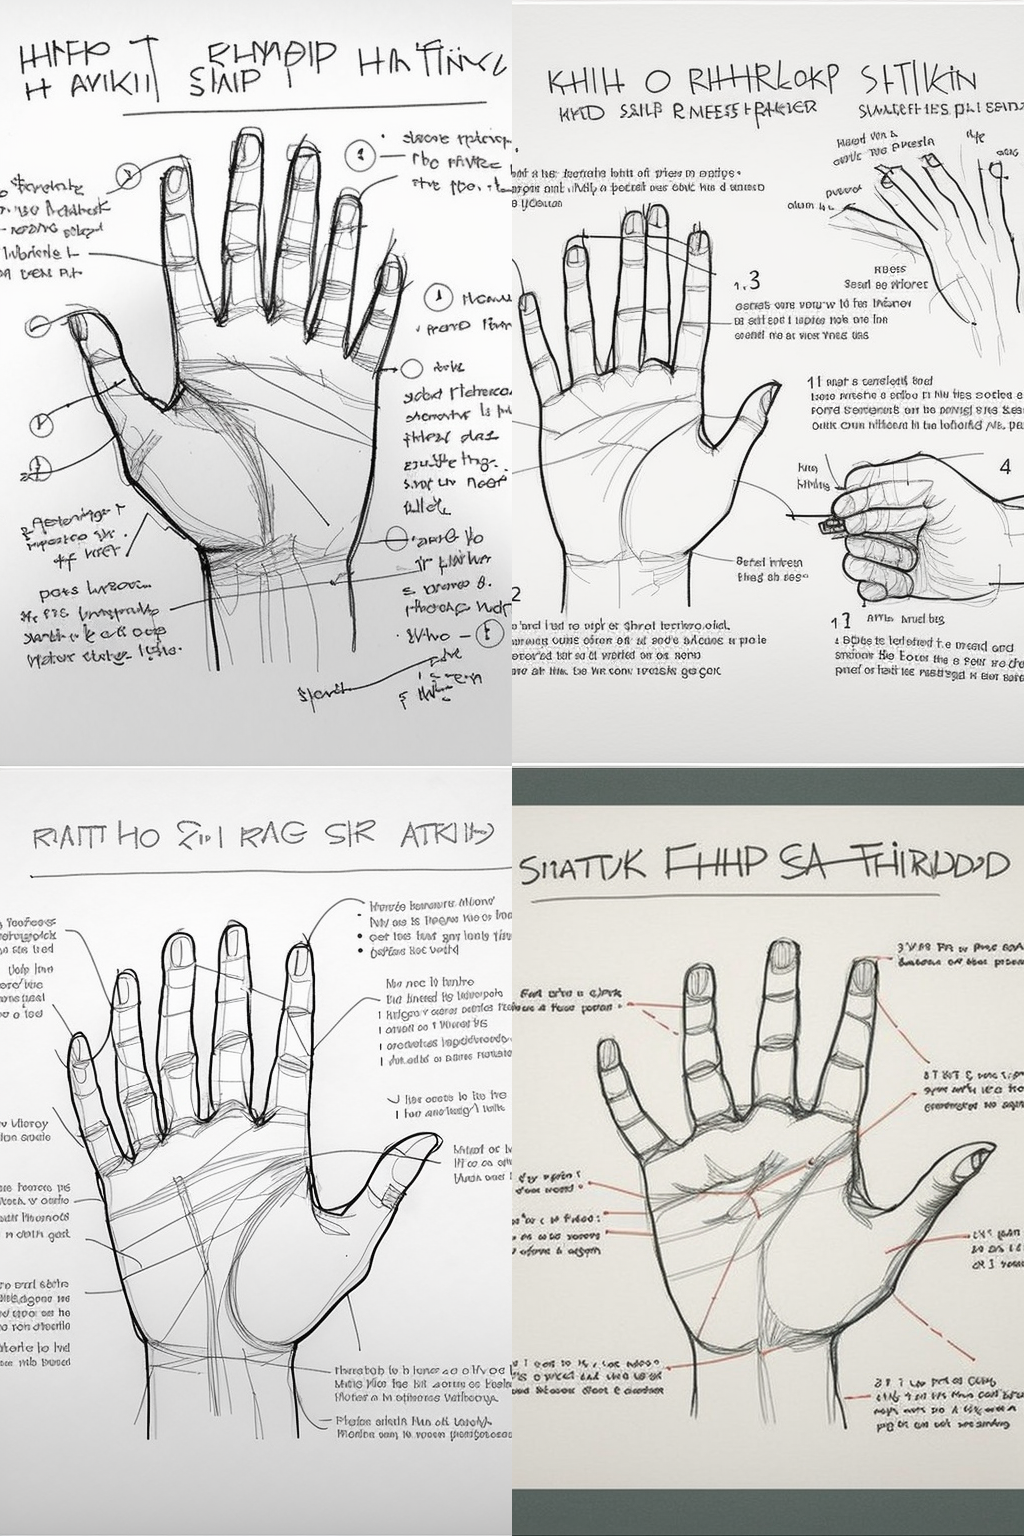 Four sketches surrounded by nonsense text as if from an art textbook about how to draw hands, but most of the hands have six fingers rather than the usual five, suggest that fingernails are possibly on the palm-side of the hand, and that the thumbnail extends from the tip of the thumb all the way back to the first knuckle.